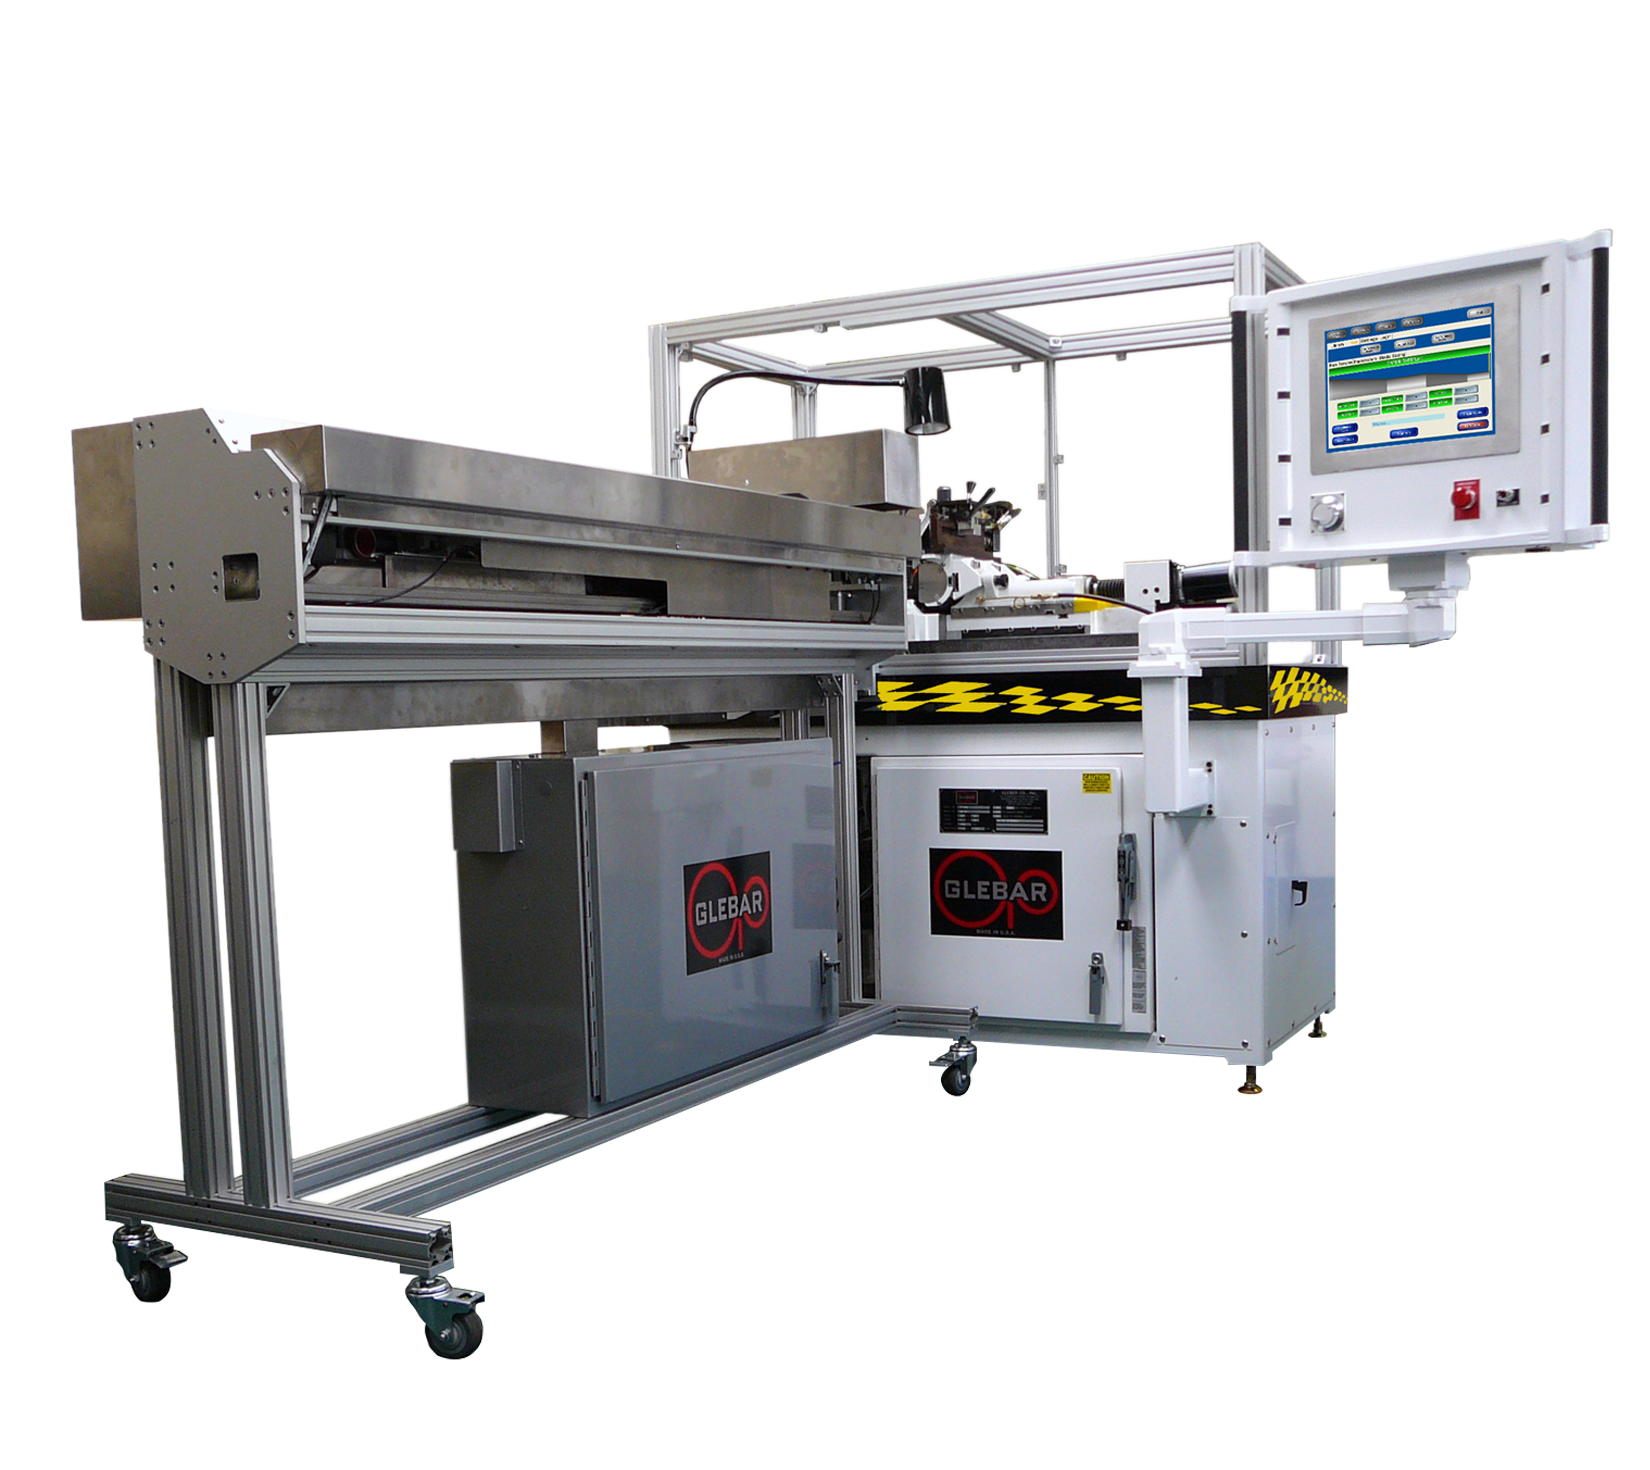 , Fully Automated Medical Guidewire Grinder Increases Throughput and Improves Efficiency